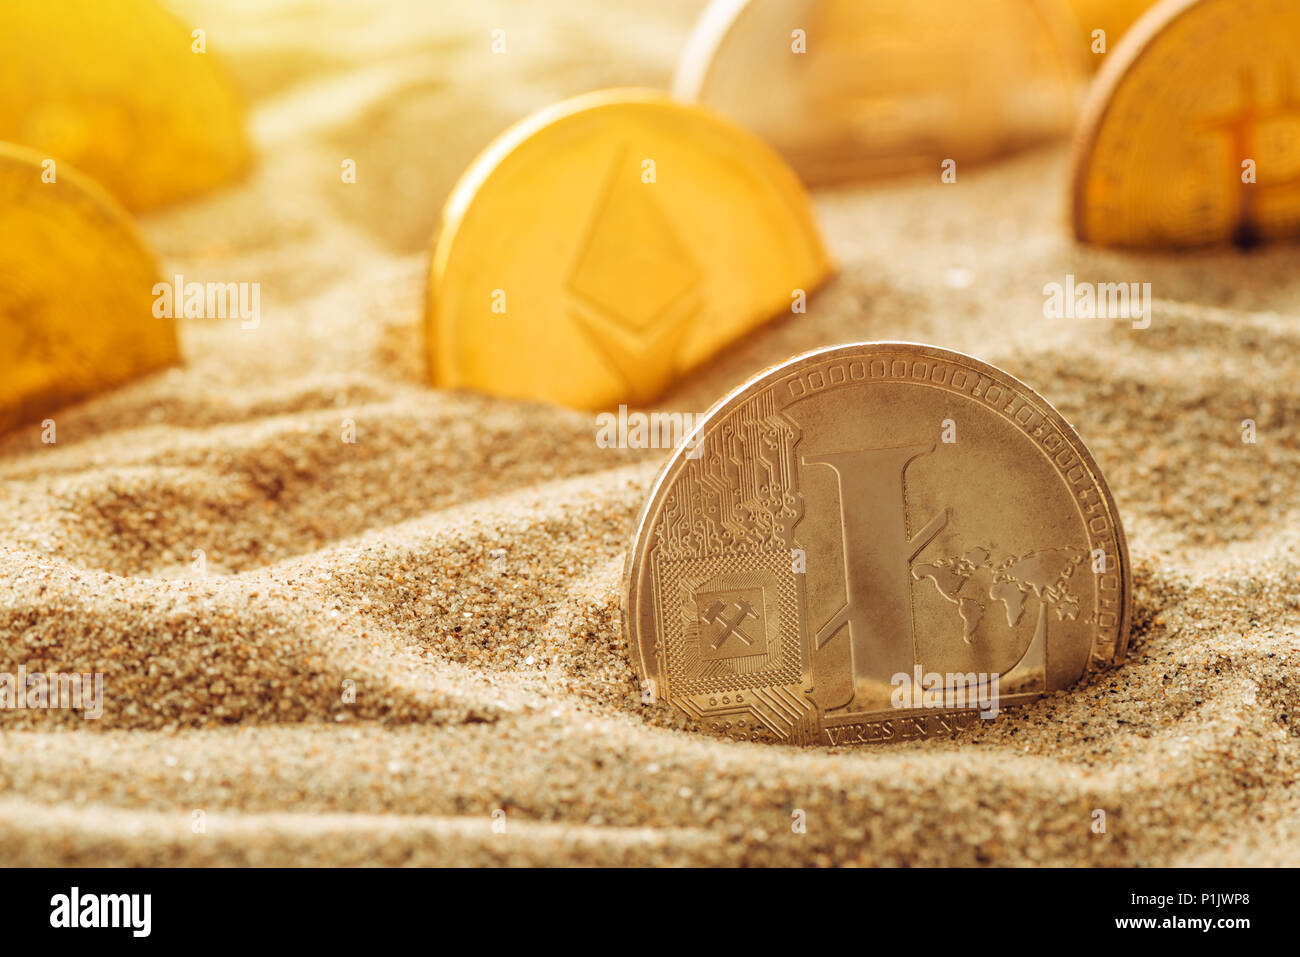 Silver Litecoin coin in sand, conceptual image for lost and found valuable cryptocurrency coins that are standing the test of time. Stock Photo